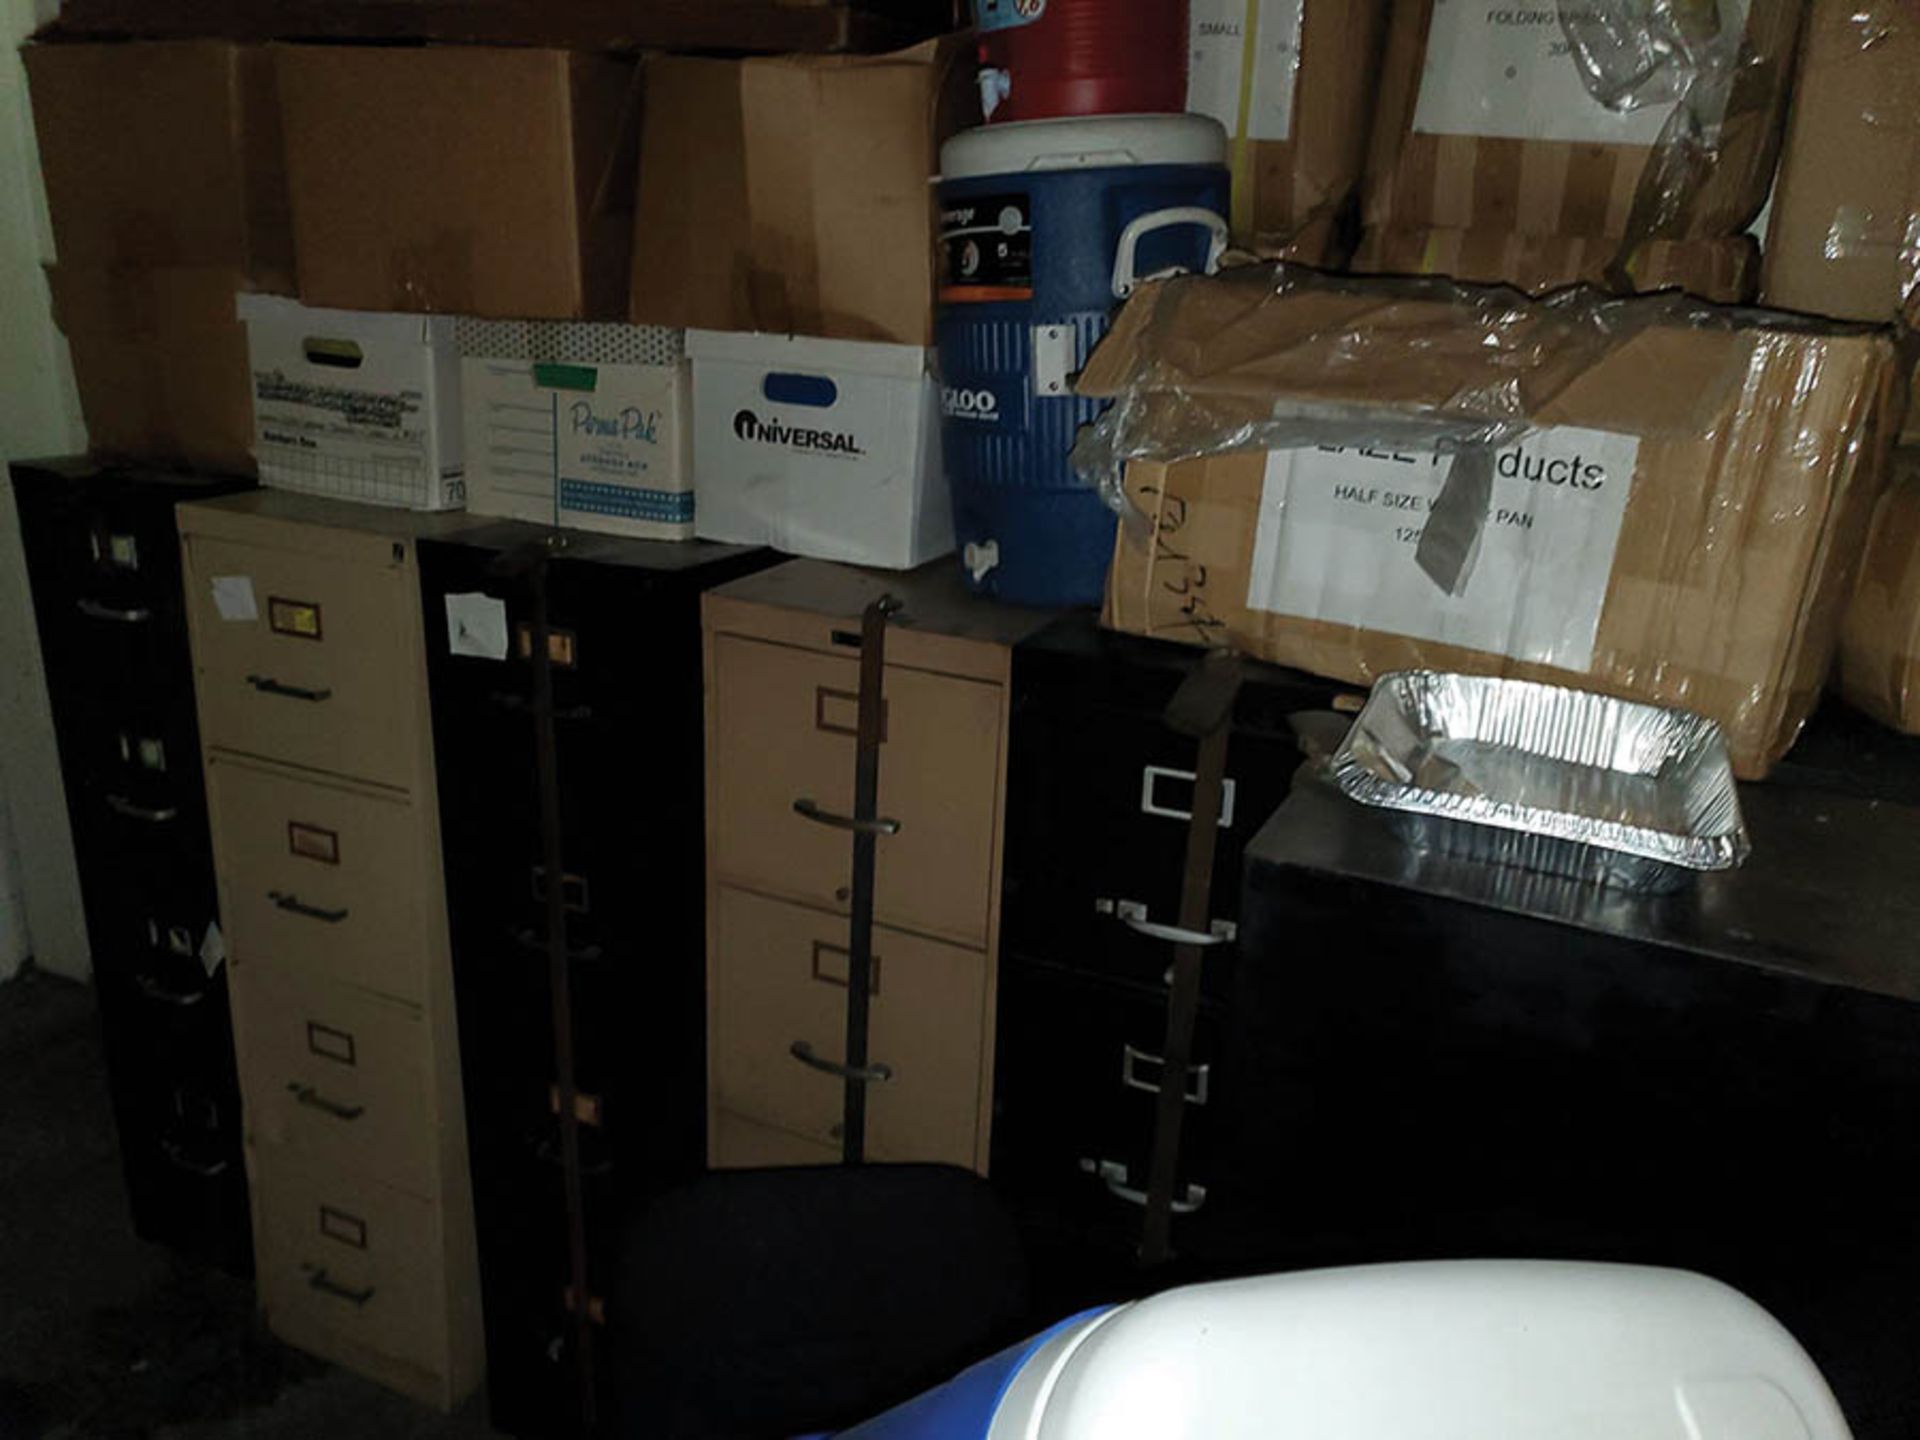 ELECTRICAL ROOM - FILING CABINETS, MOTORS, GEAR BOXES, CONVEYOR, (EVERYTHING IN ROOM THROUGH MENS